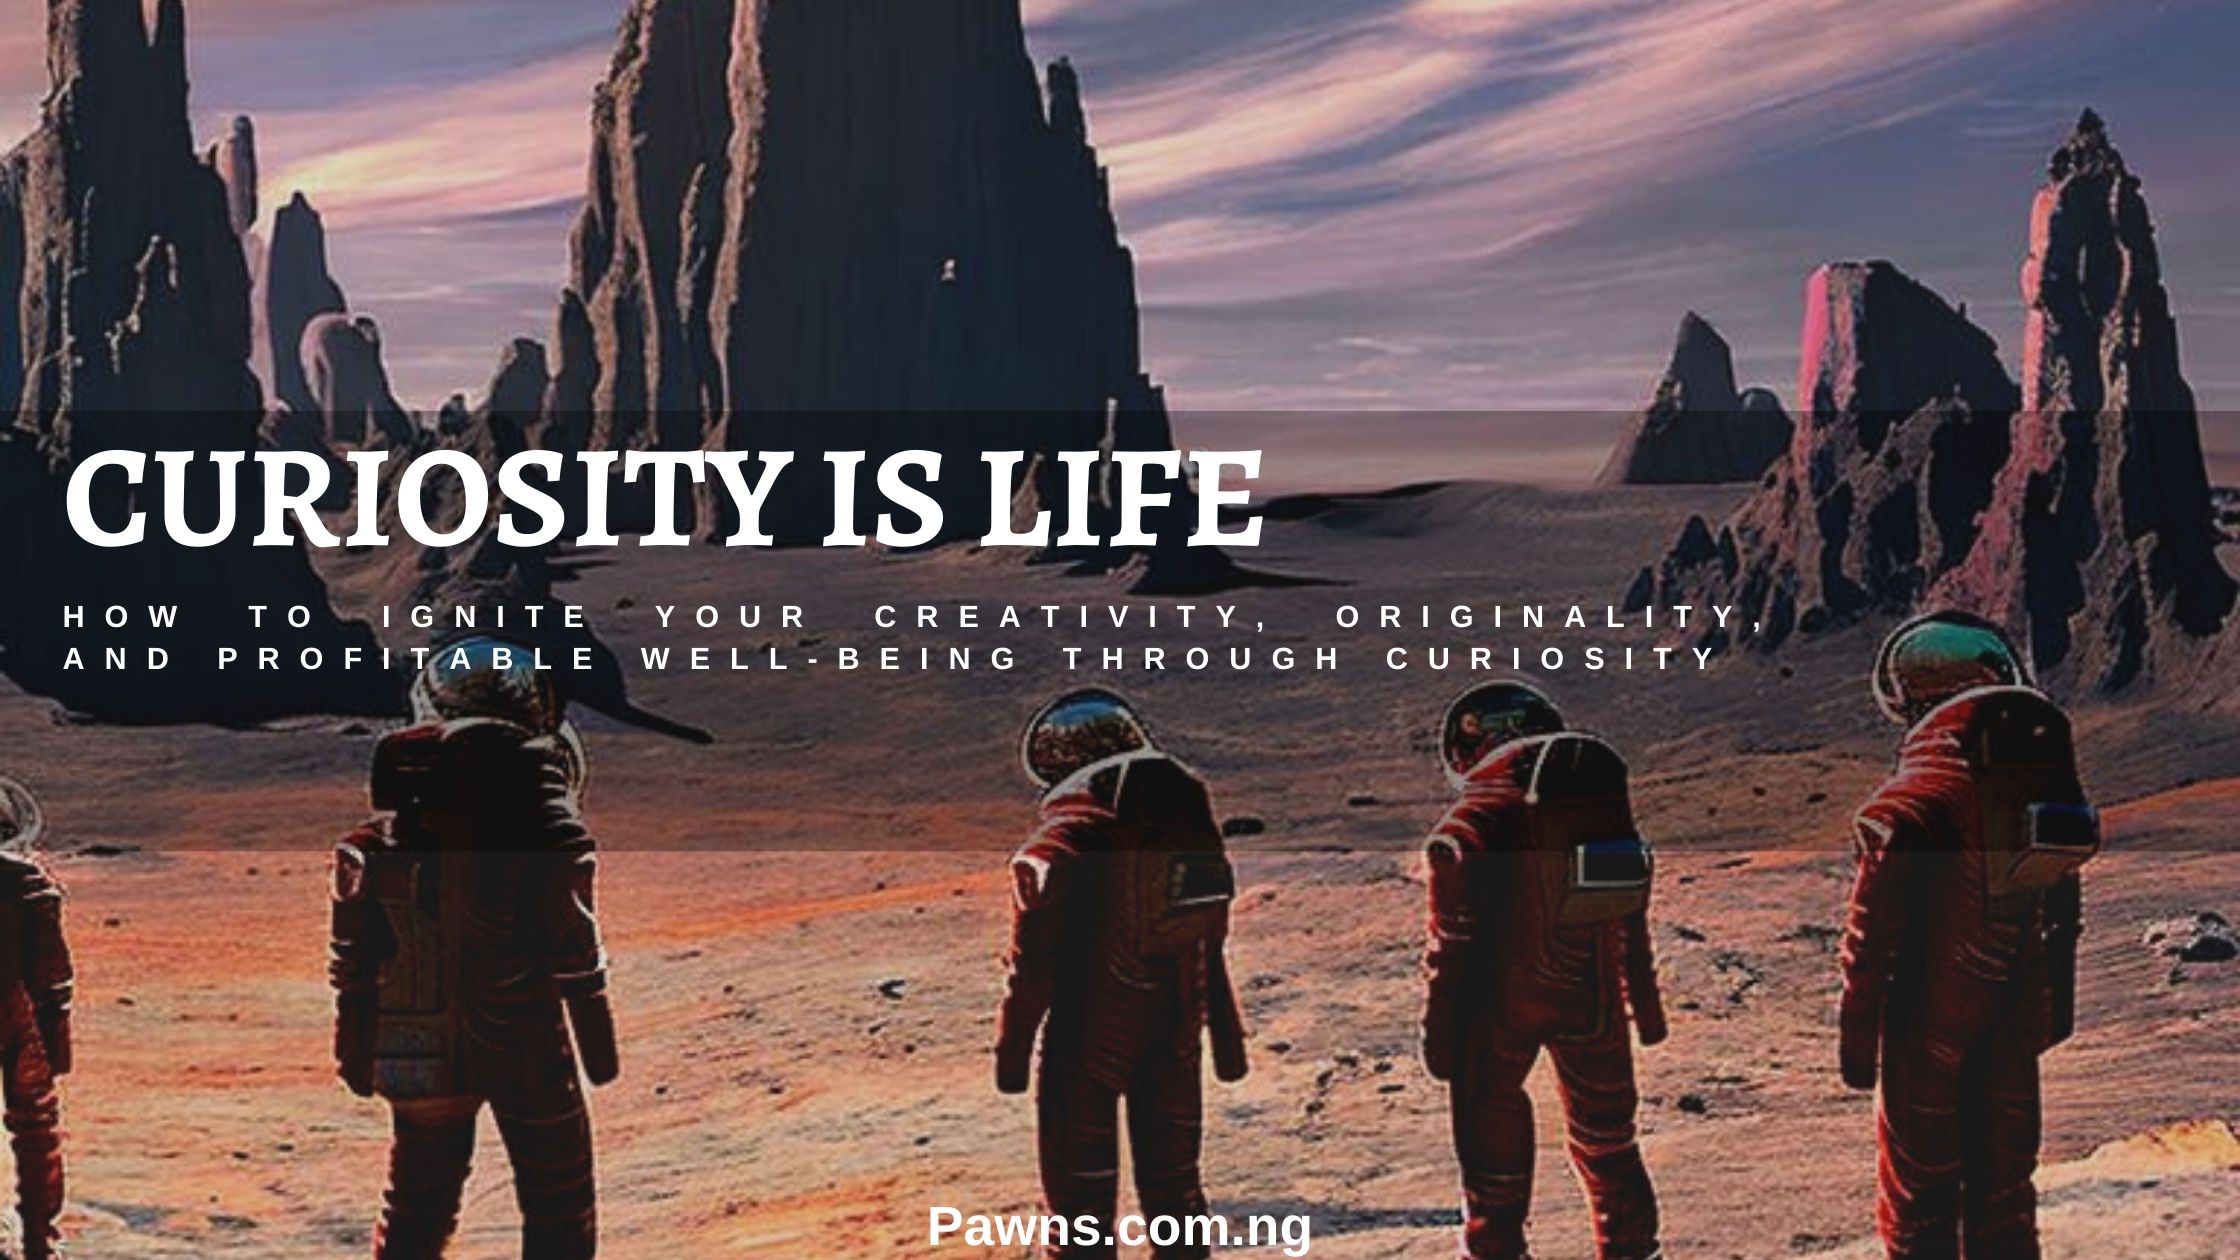 Curiosity is life. How To Ignite Your Creativity, Originality, And Profitable Well-being Through Curiosity.